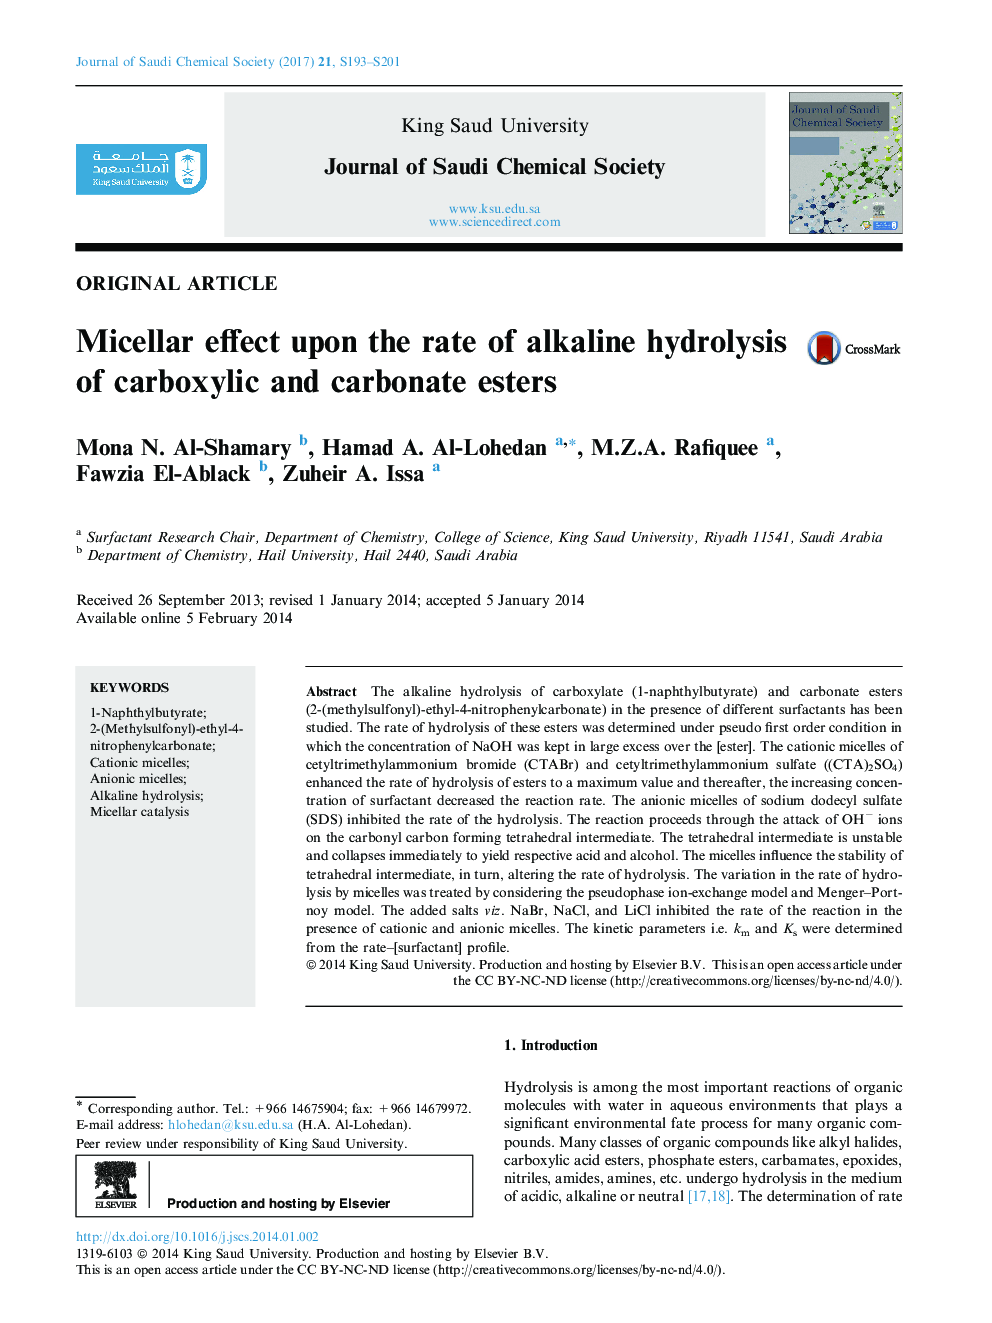 Micellar effect upon the rate of alkaline hydrolysis of carboxylic and carbonate esters